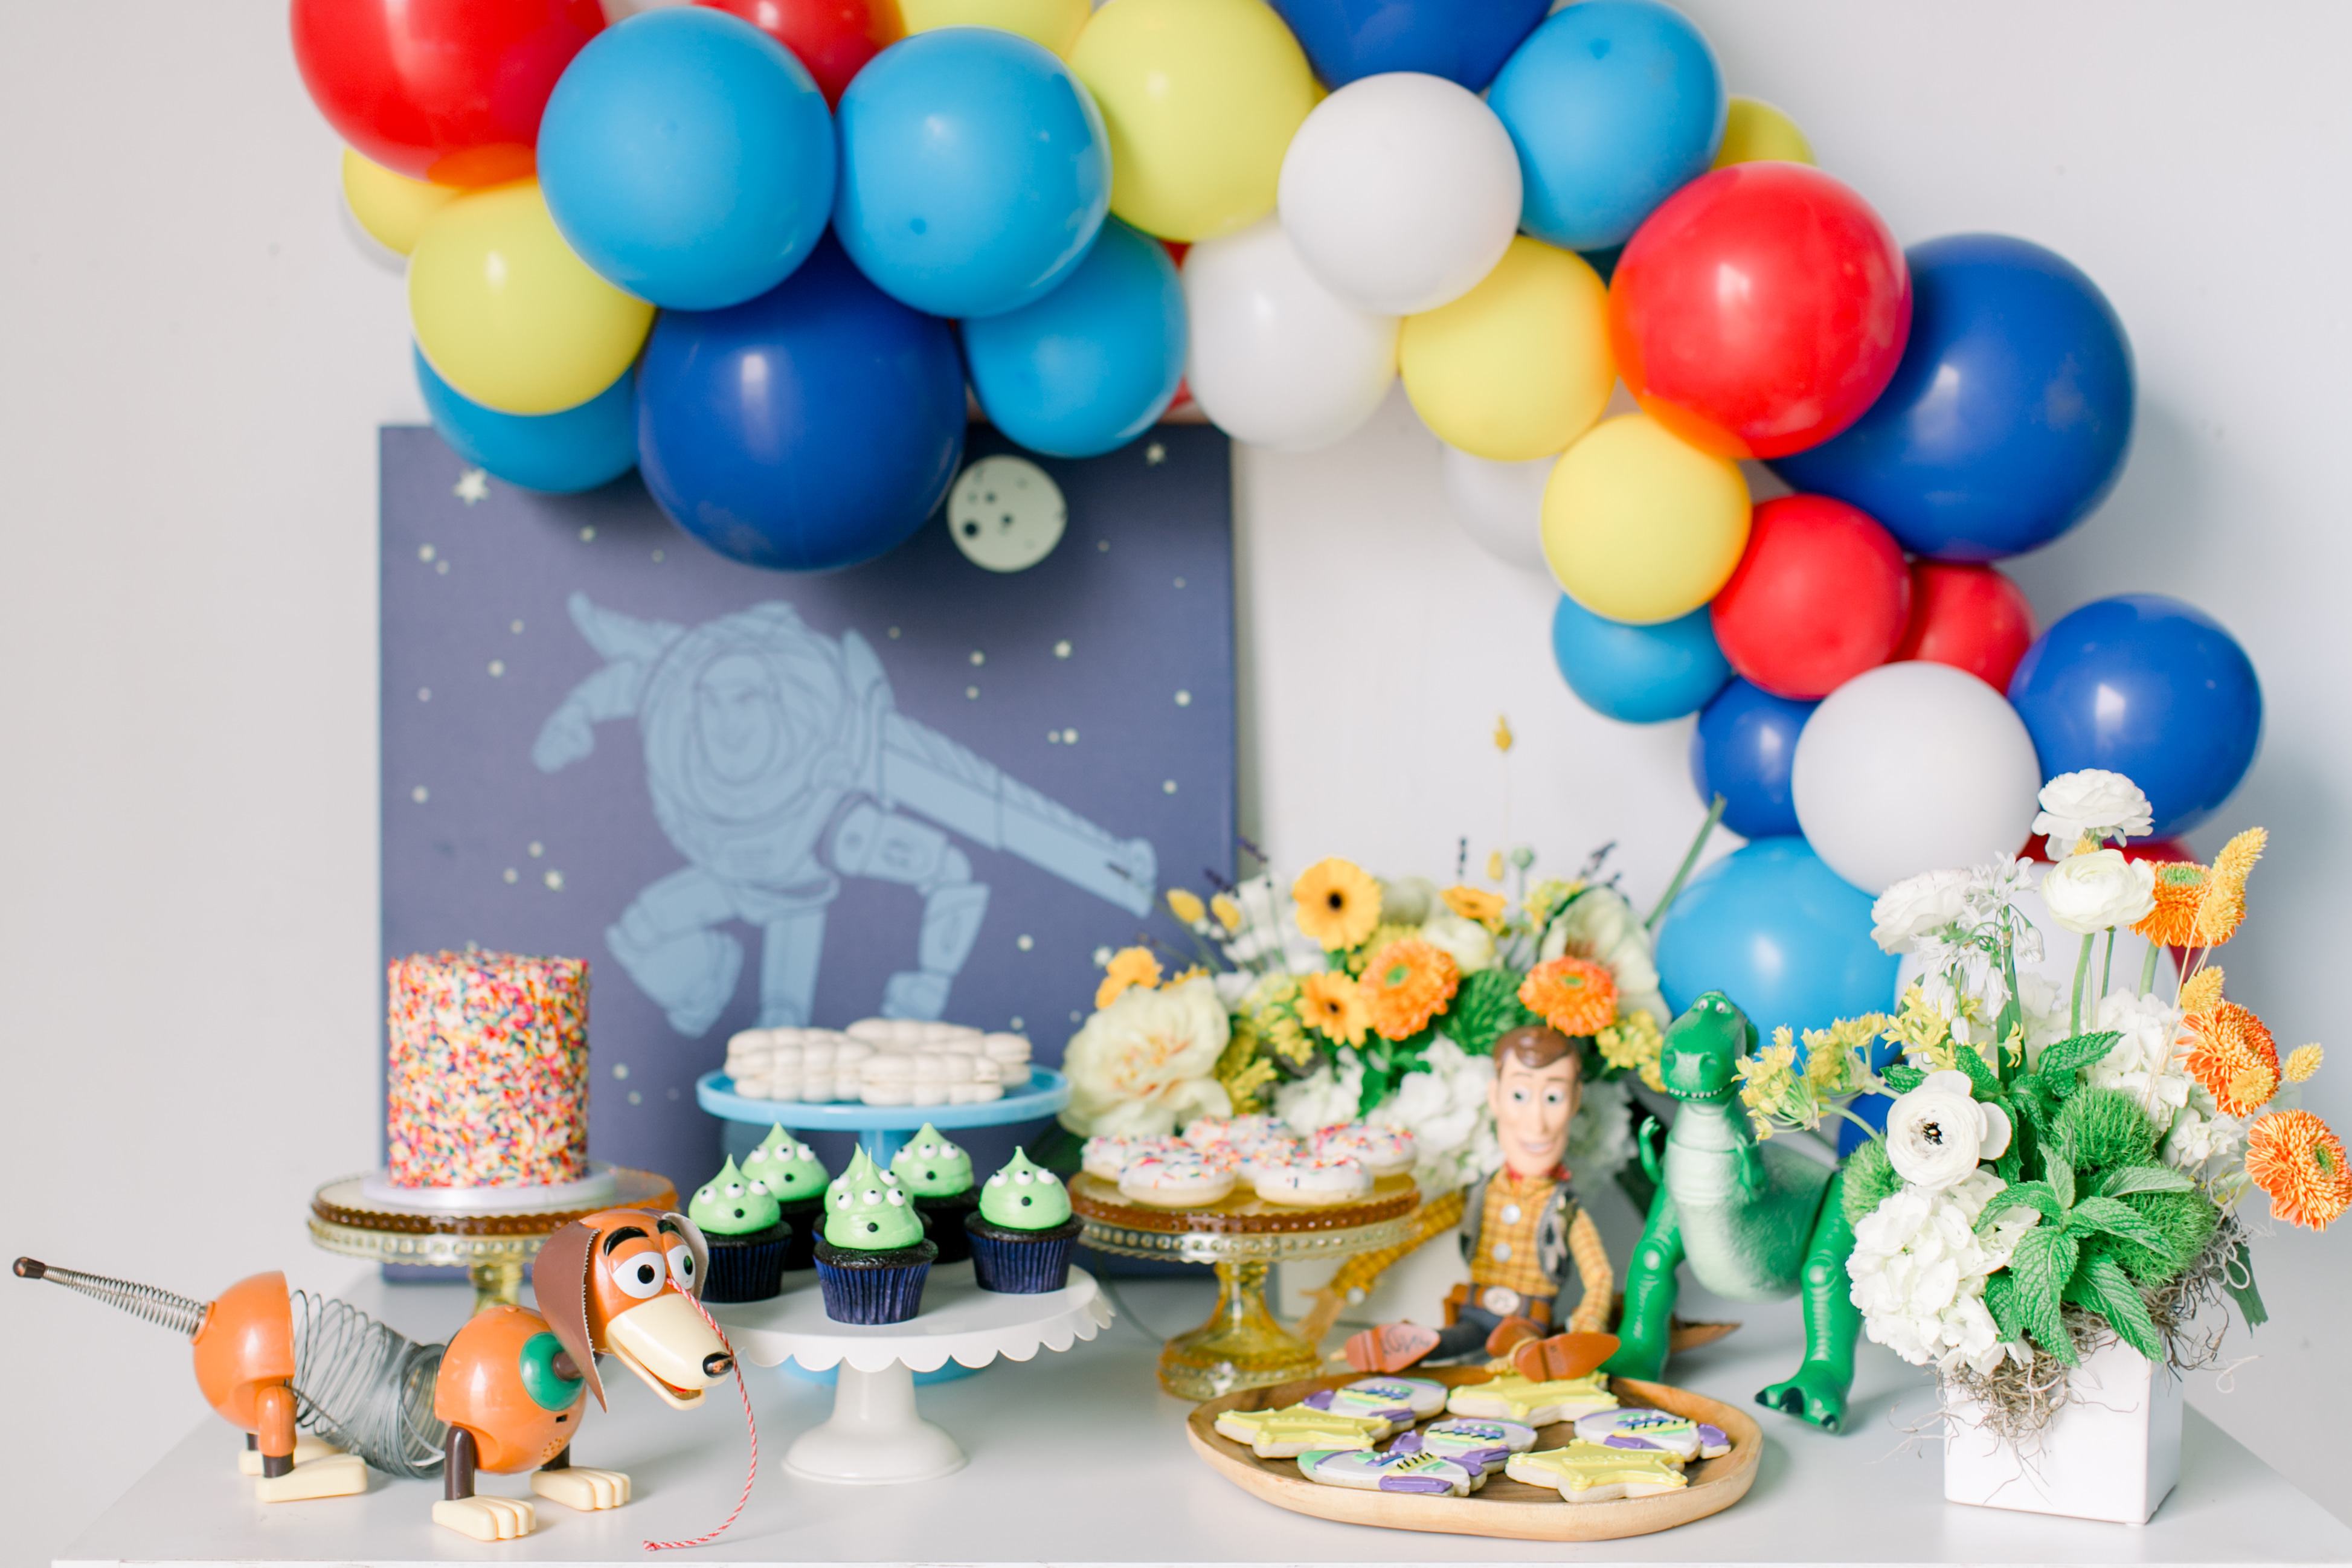 You’ve Got a Friend in Me – Toy Story Party